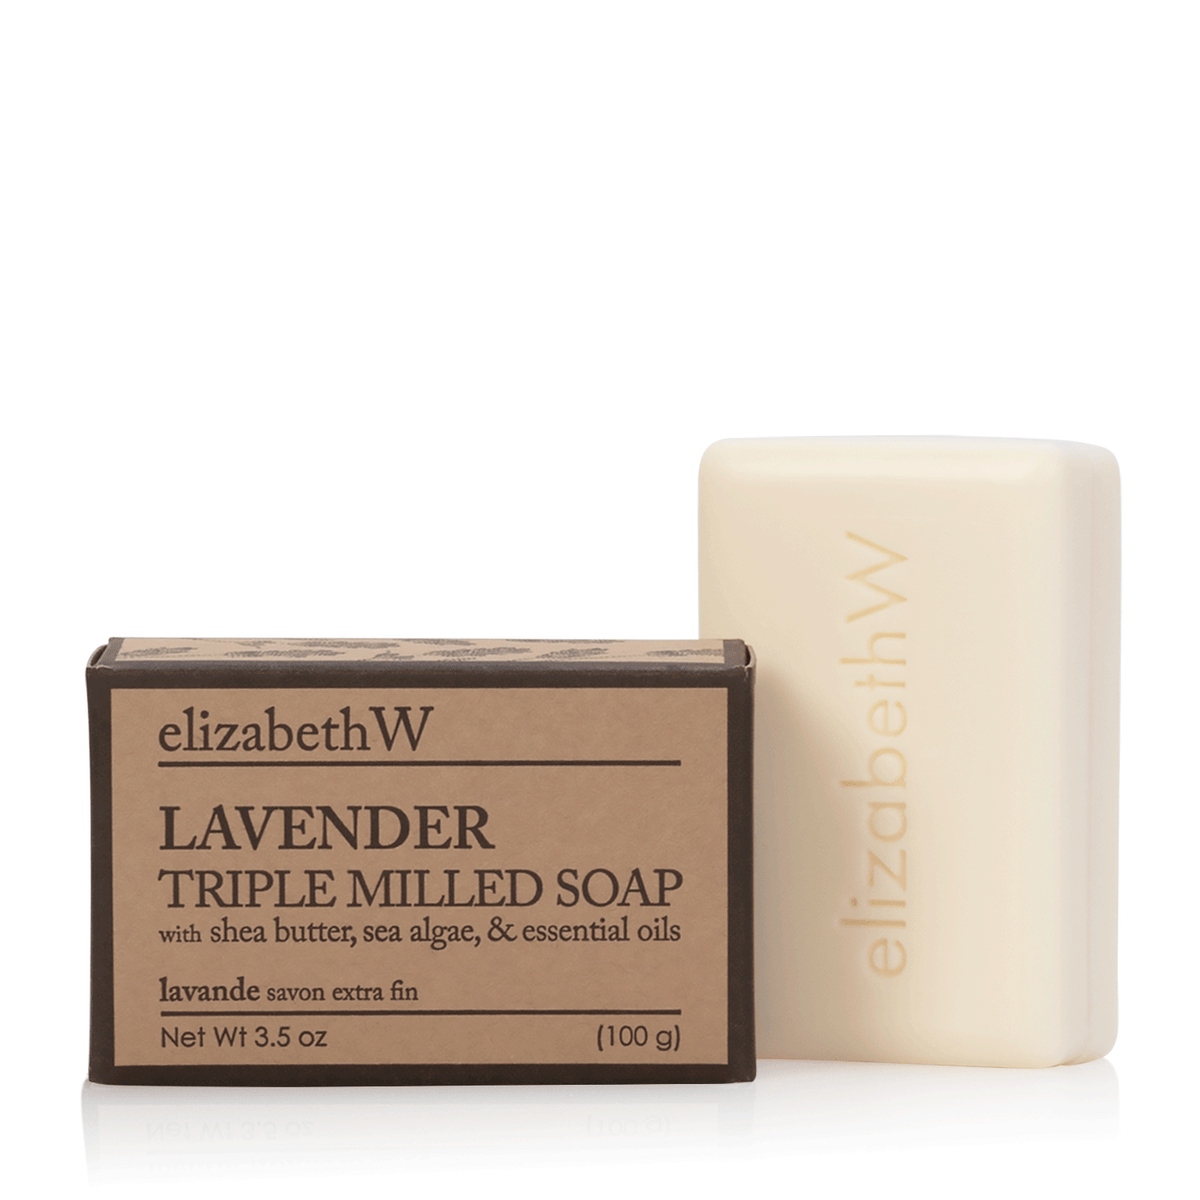 A bar of Elizabeth W Purely Essential Lavender Triple-Milled Soap beside its box, labeled with ingredients like shea butter, sea algae, and essential oils, against a white background.